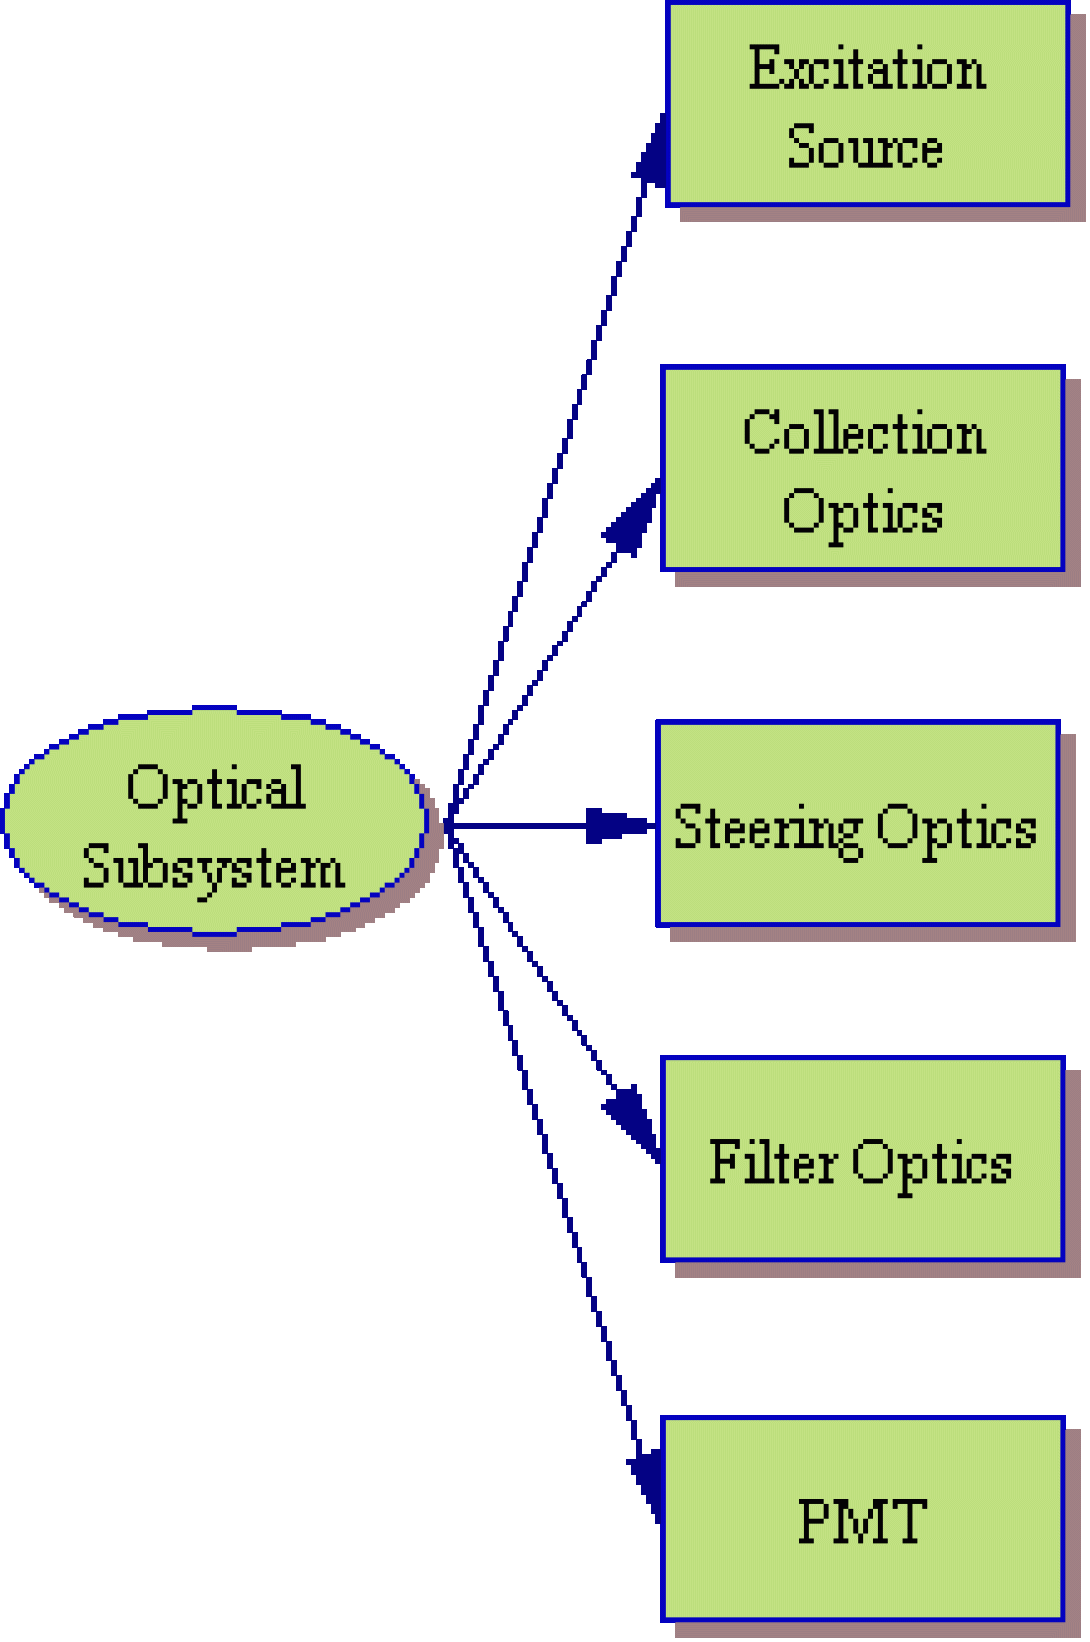 Flow Cytometry optical subsystem illustration